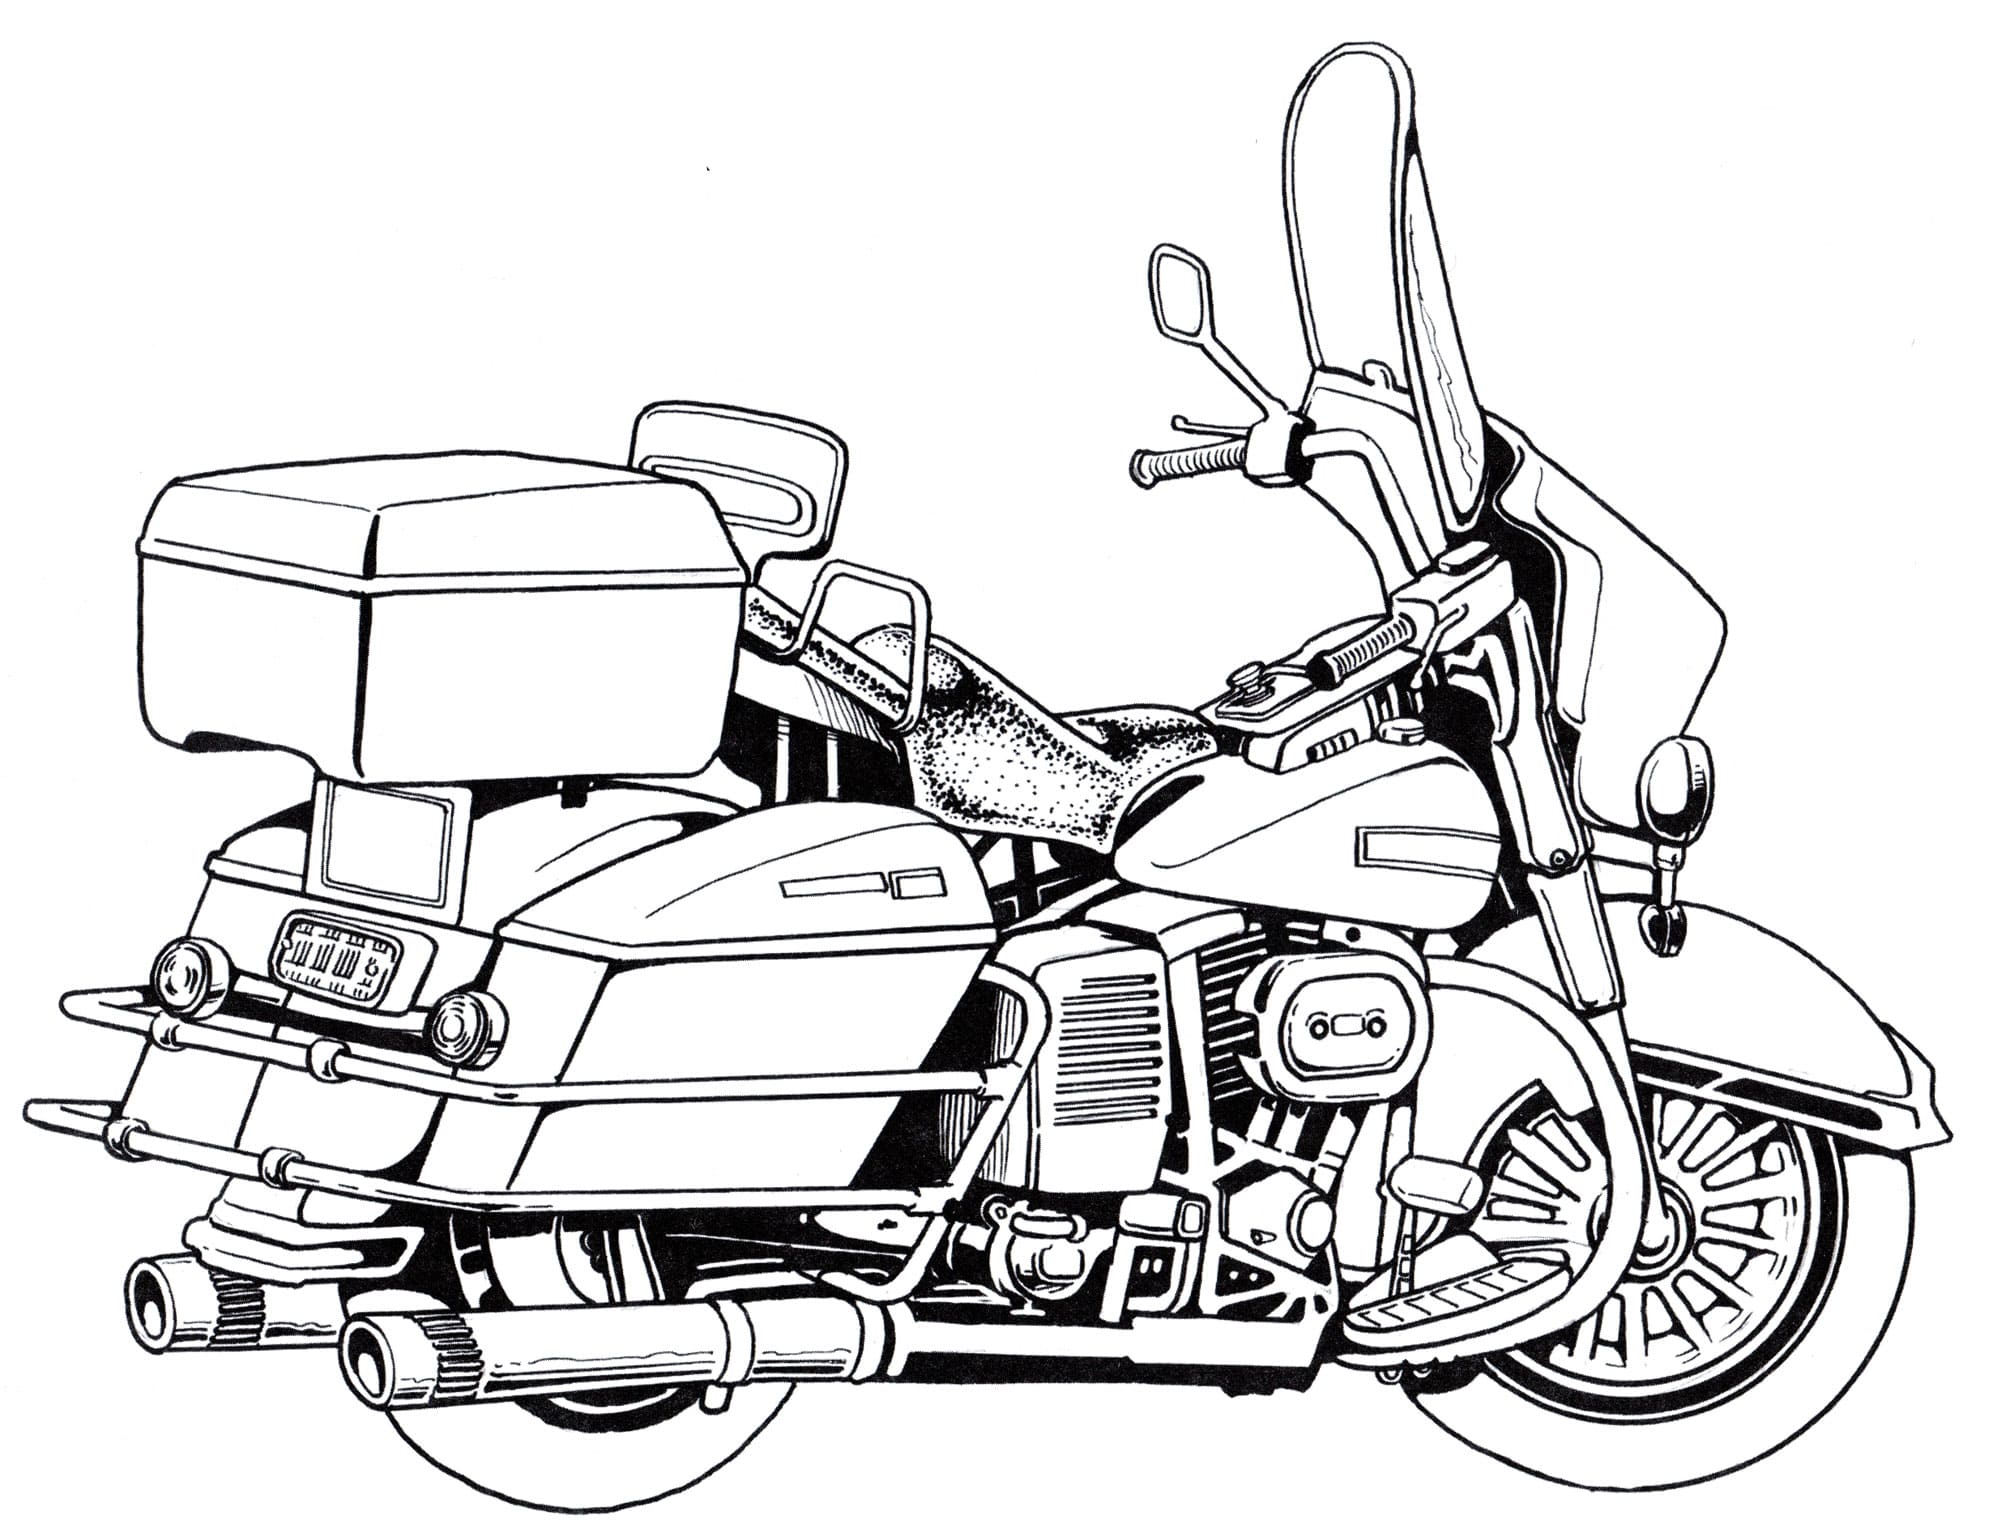 Motorcycle Coloring Pages For Kids. Free Printable